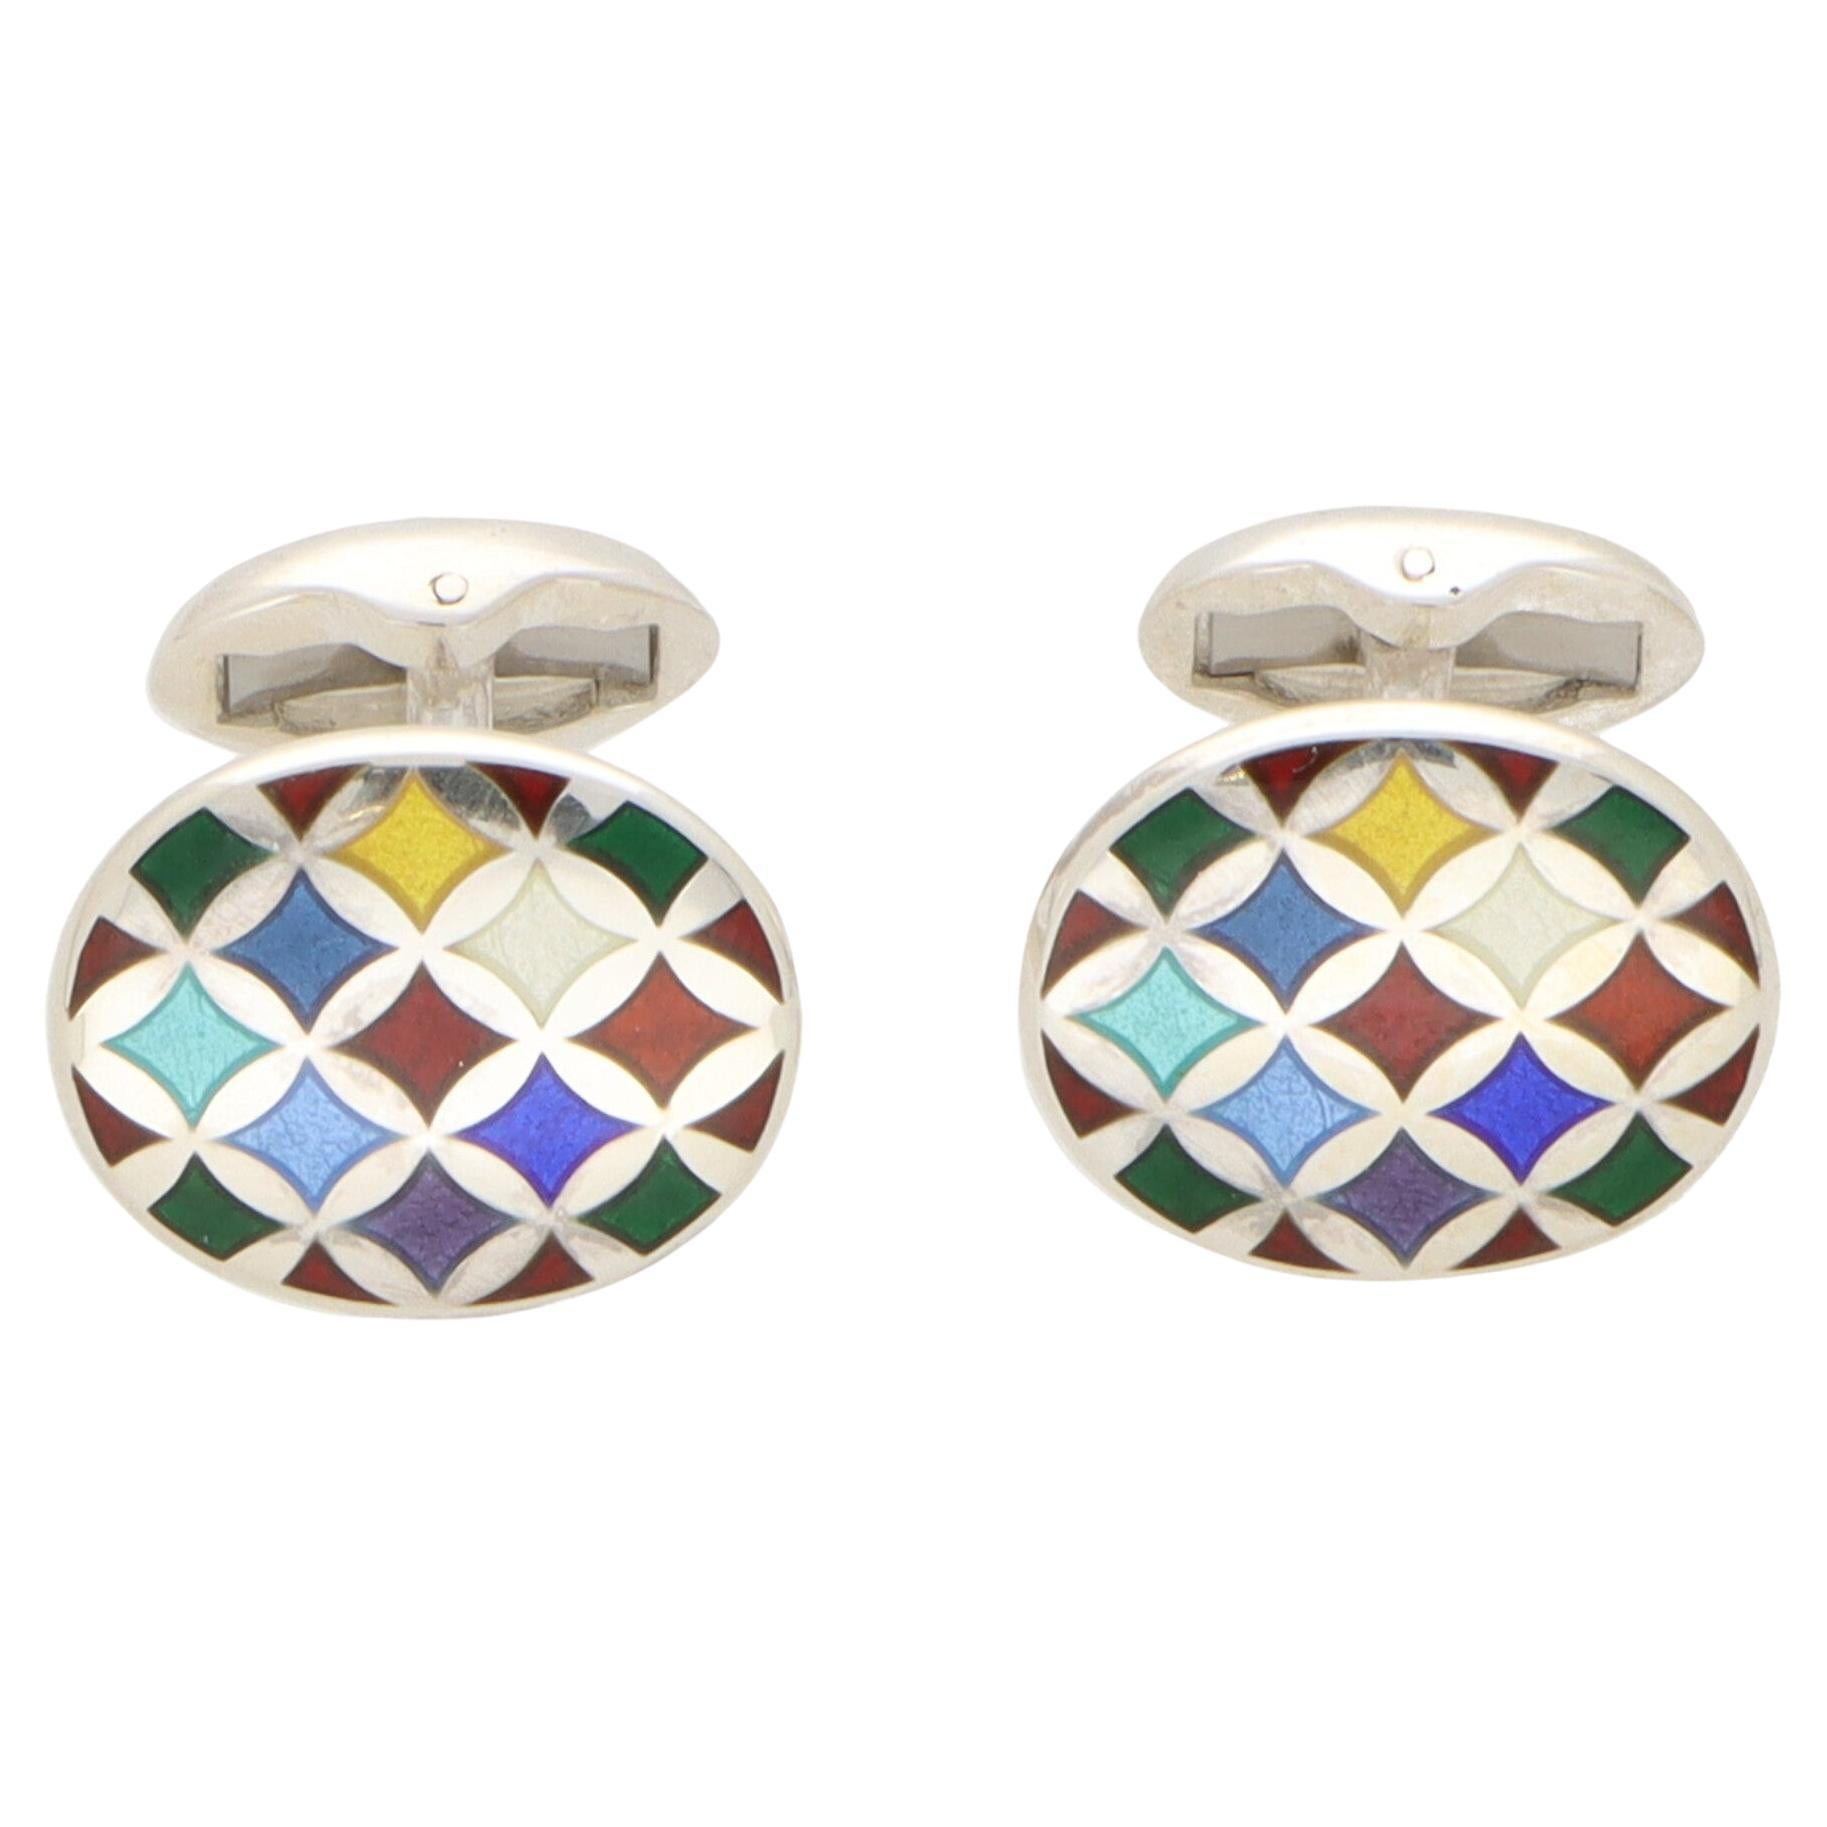 Multi-Coloured Harlequin Style Swivel Back Cufflinks in British Sterling Silver